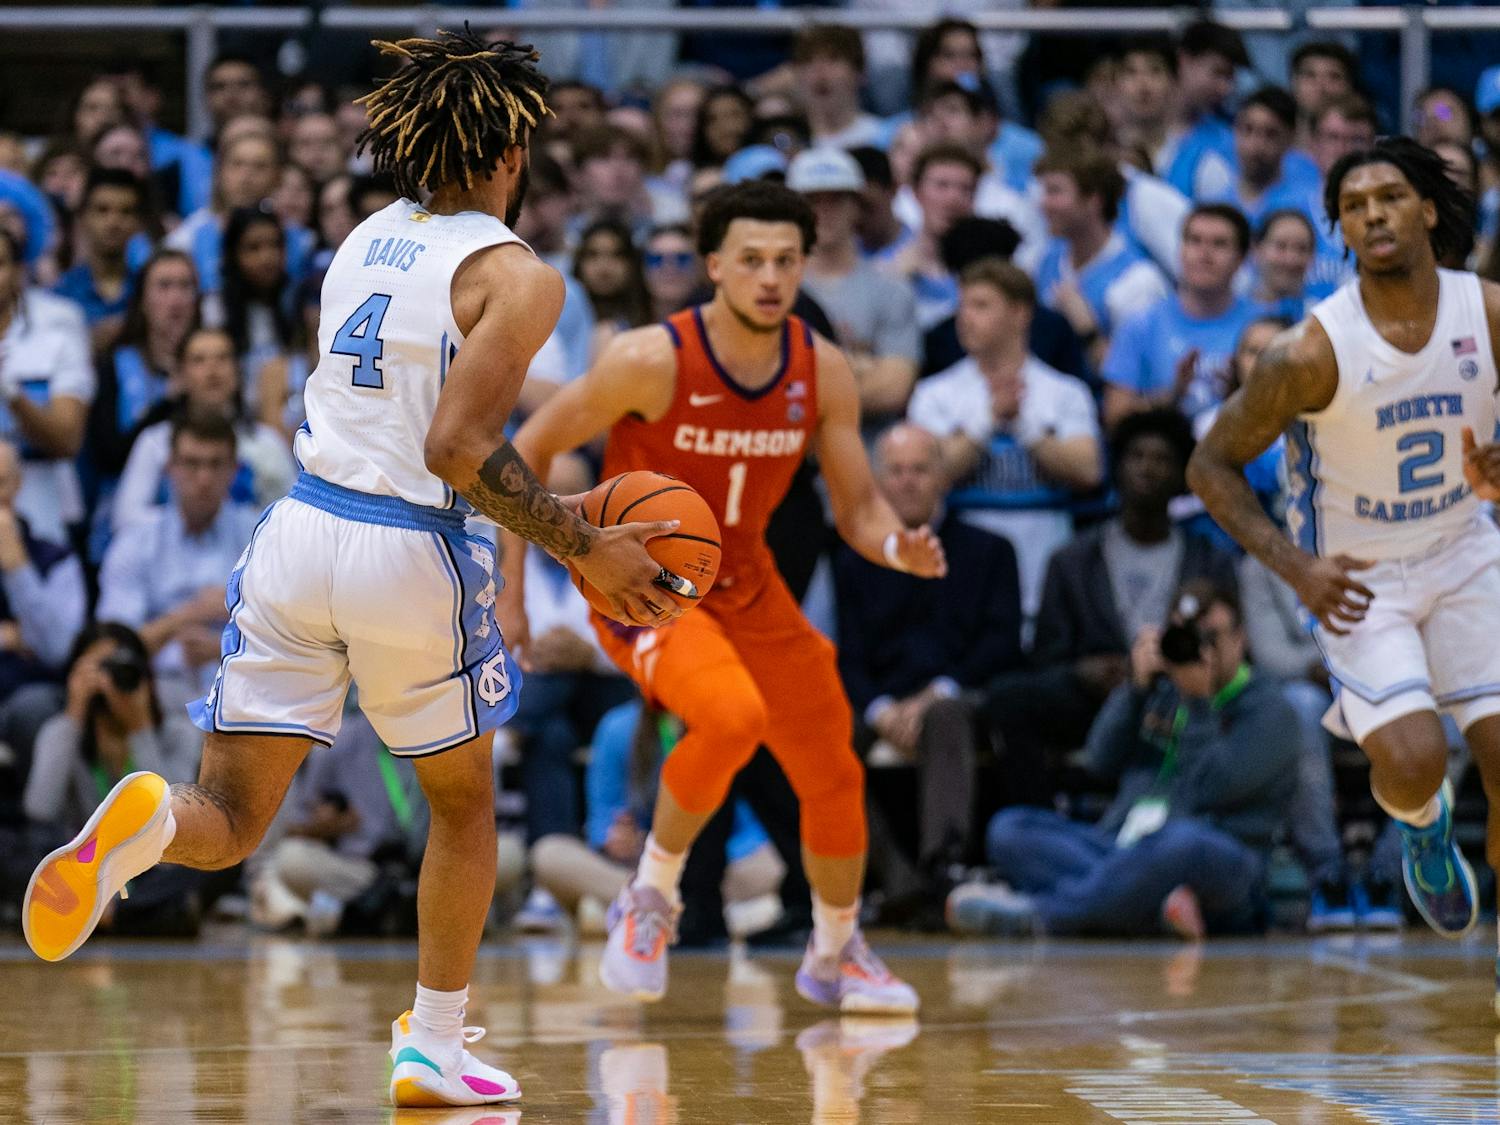 UNC junior guard RJ Davis (4) looks to hand the ball off to junior guard Caleb Love (2) during the men’s basketball game against Clemson on Saturday, Feb. 11, 2023, at the Dean E. Smith Center. UNC beat Clemson 91-71.